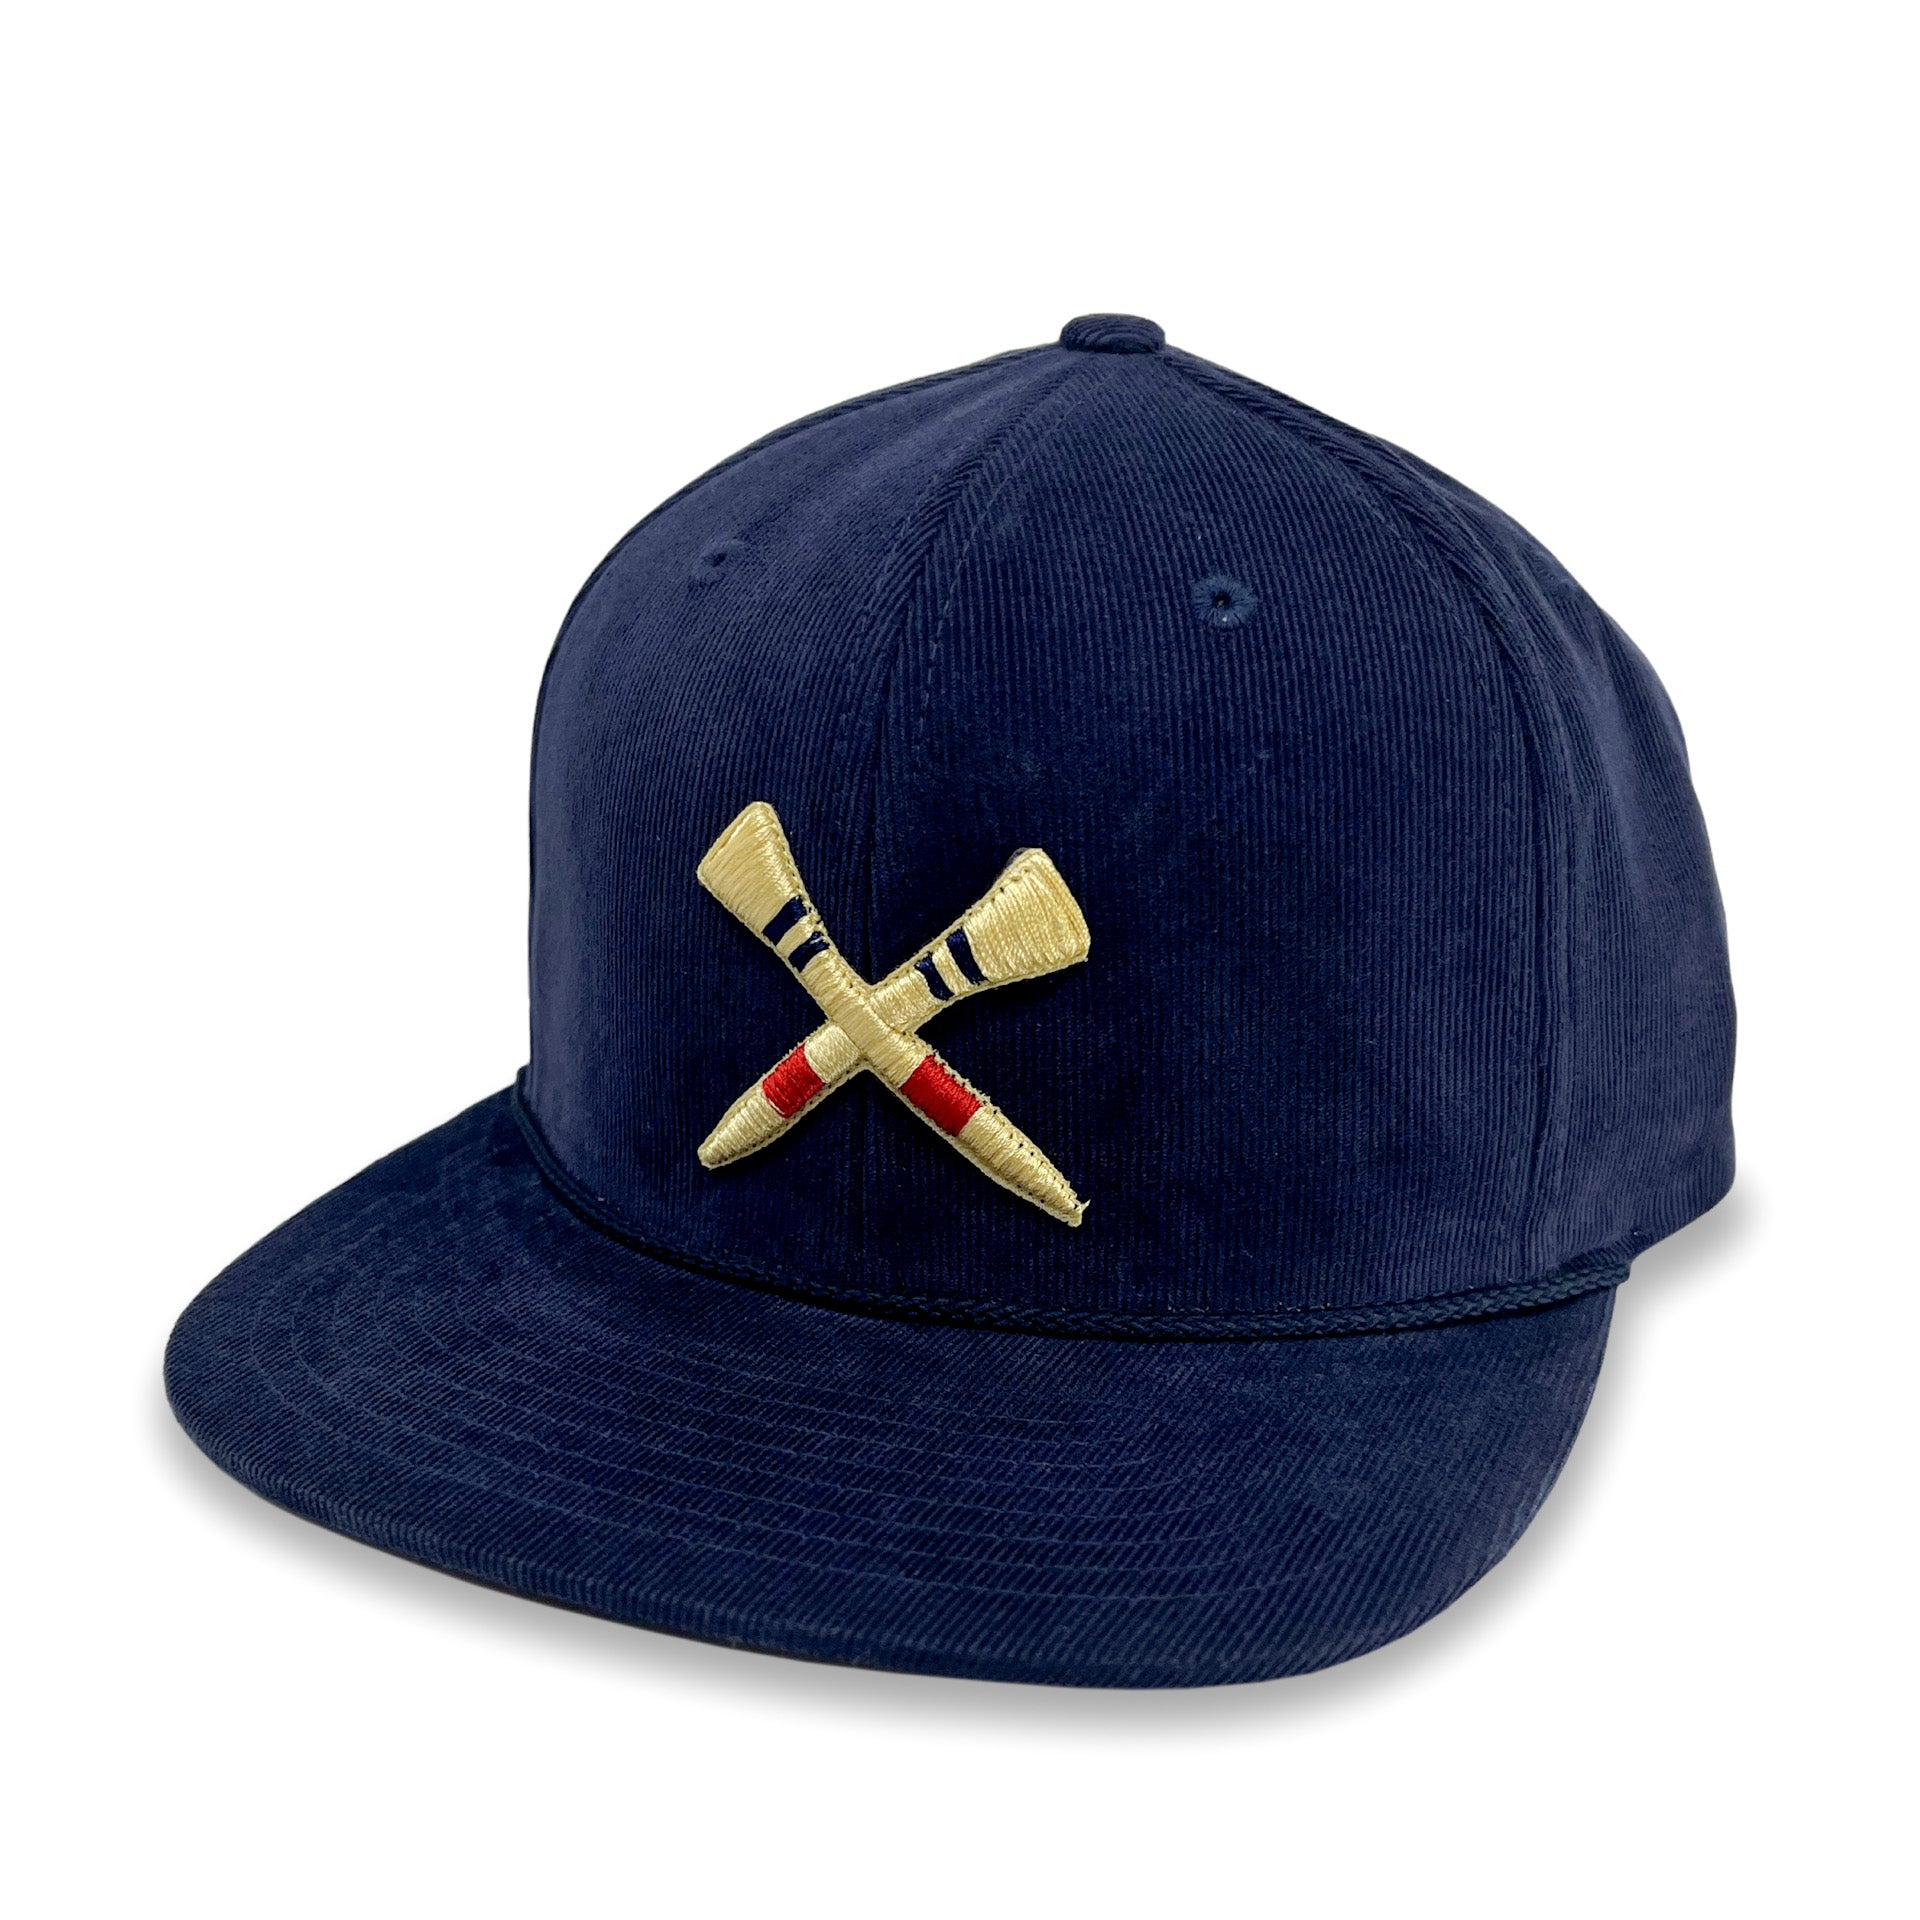 "The Cross Tees" Rope Snap-Back